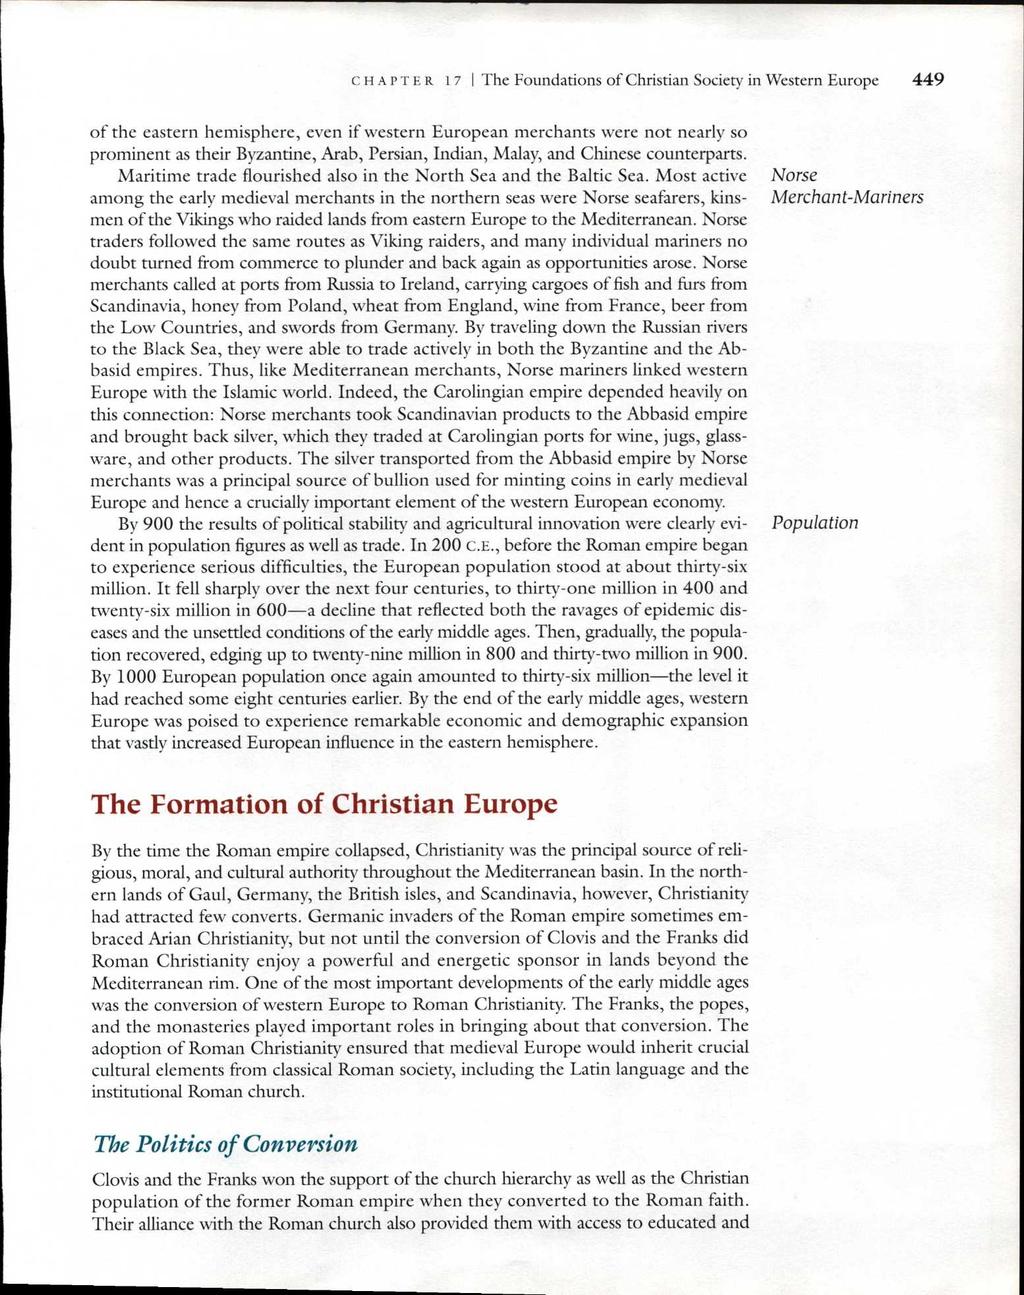 CHAPTER 17 I The Foundations of Christian Society in Western Europe 449 of the eastern hemisphere, even if western European merchants were not nearly so prominent as their Byzantine, Arab, Persian,